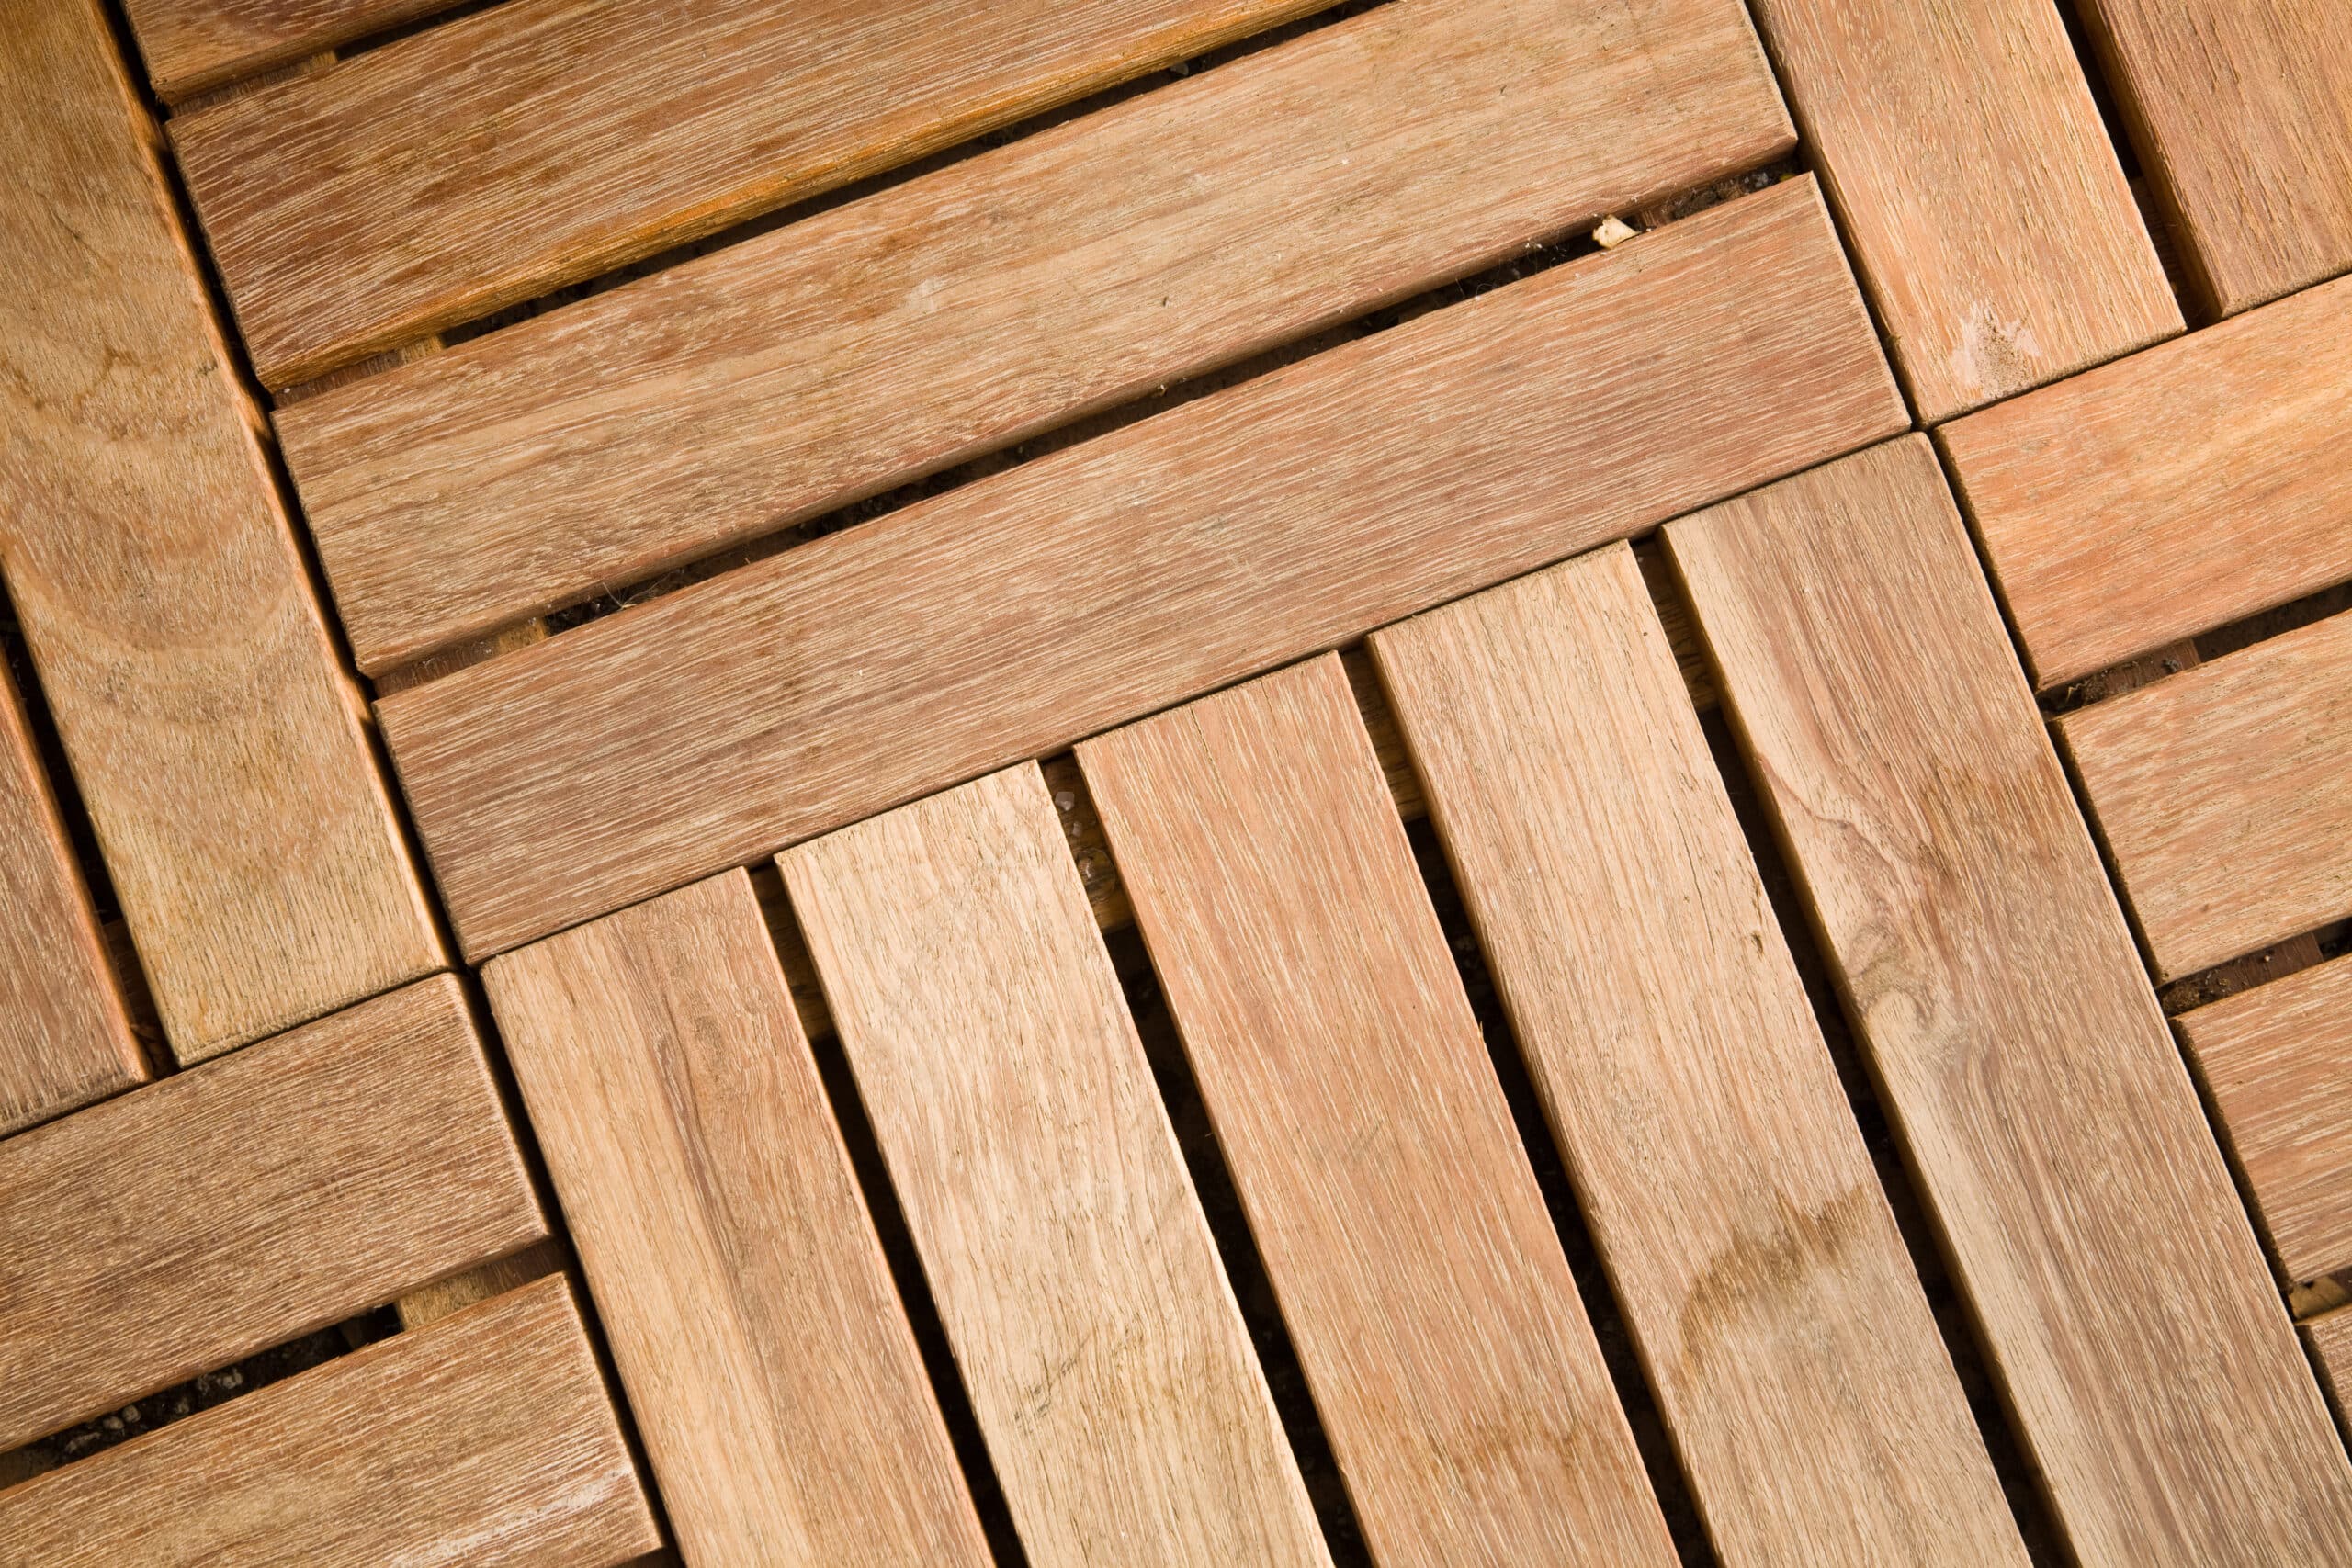 How to Choose a Deck Material